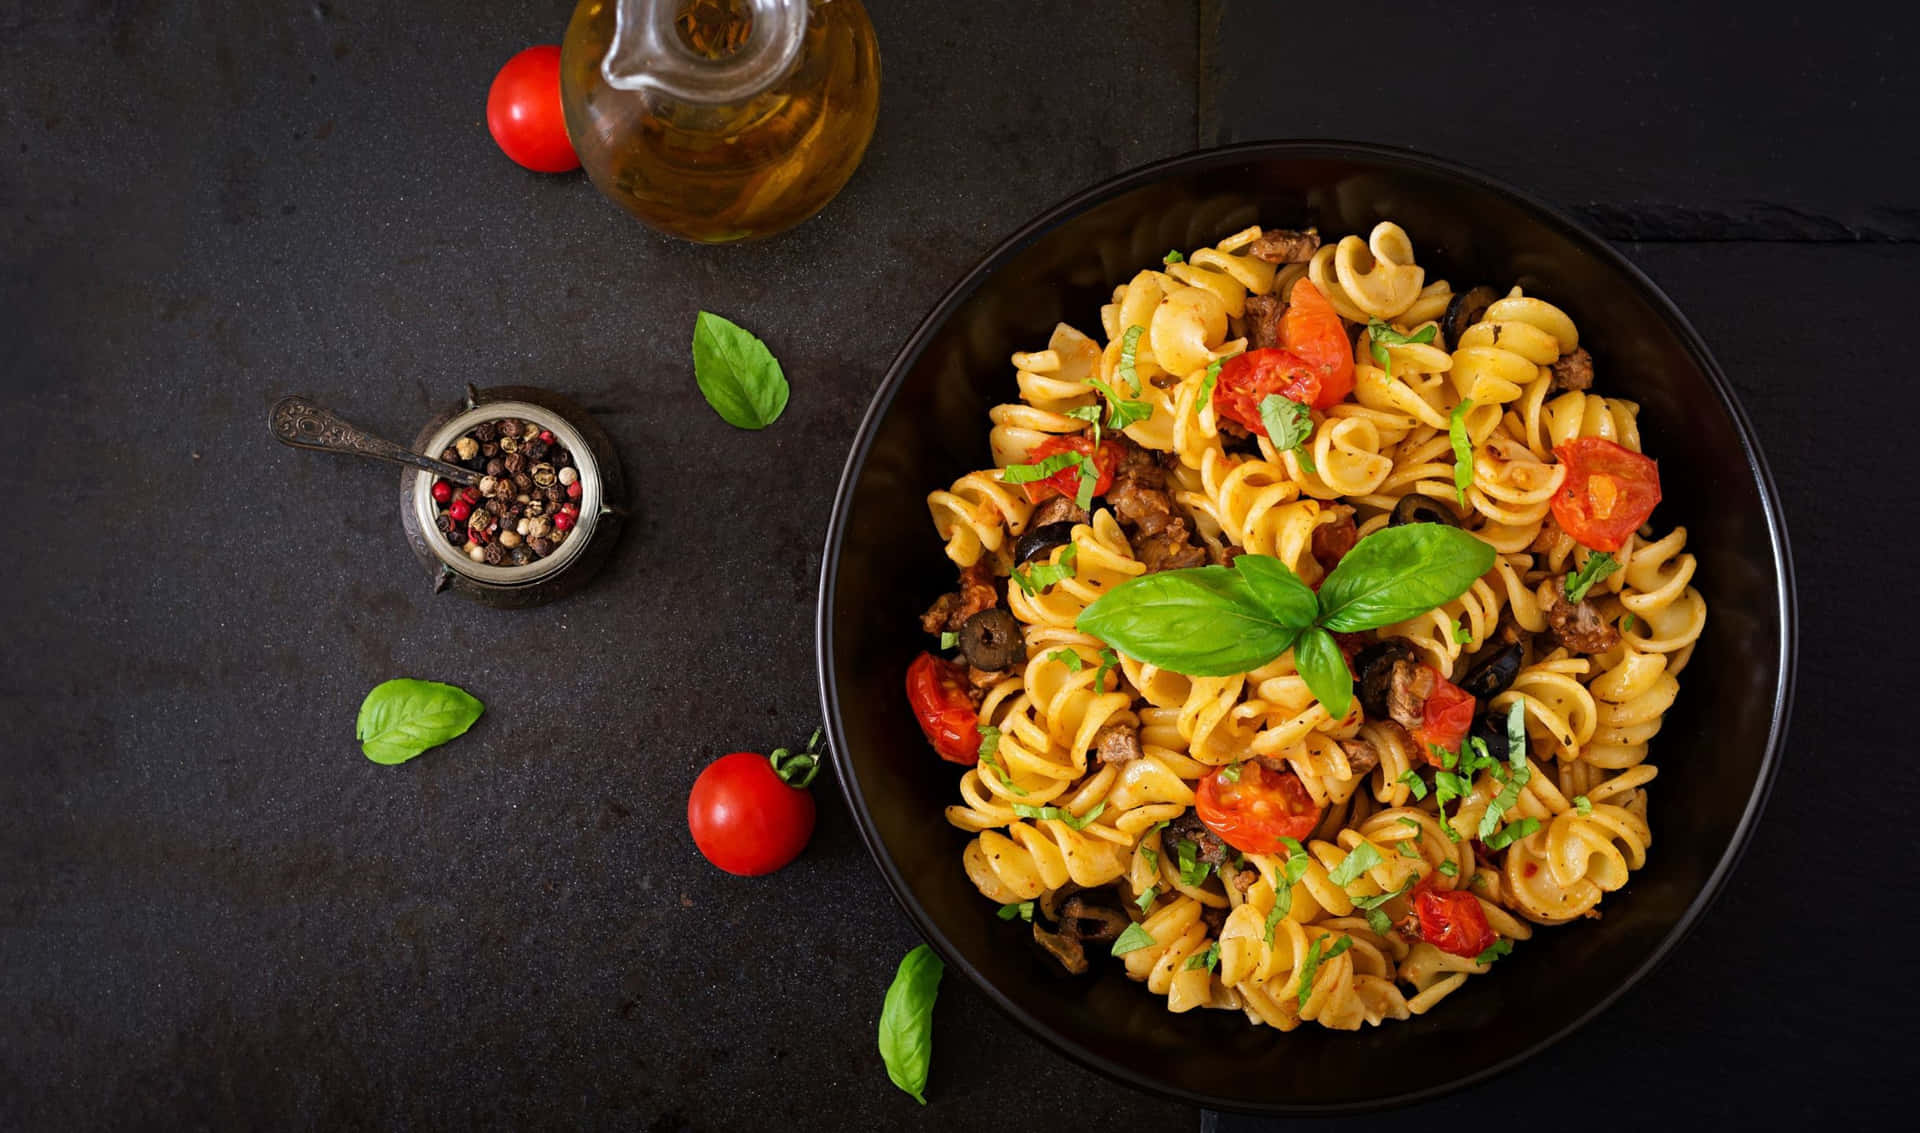 Pasta With Tomatoes And Herbs In A Black Bowl